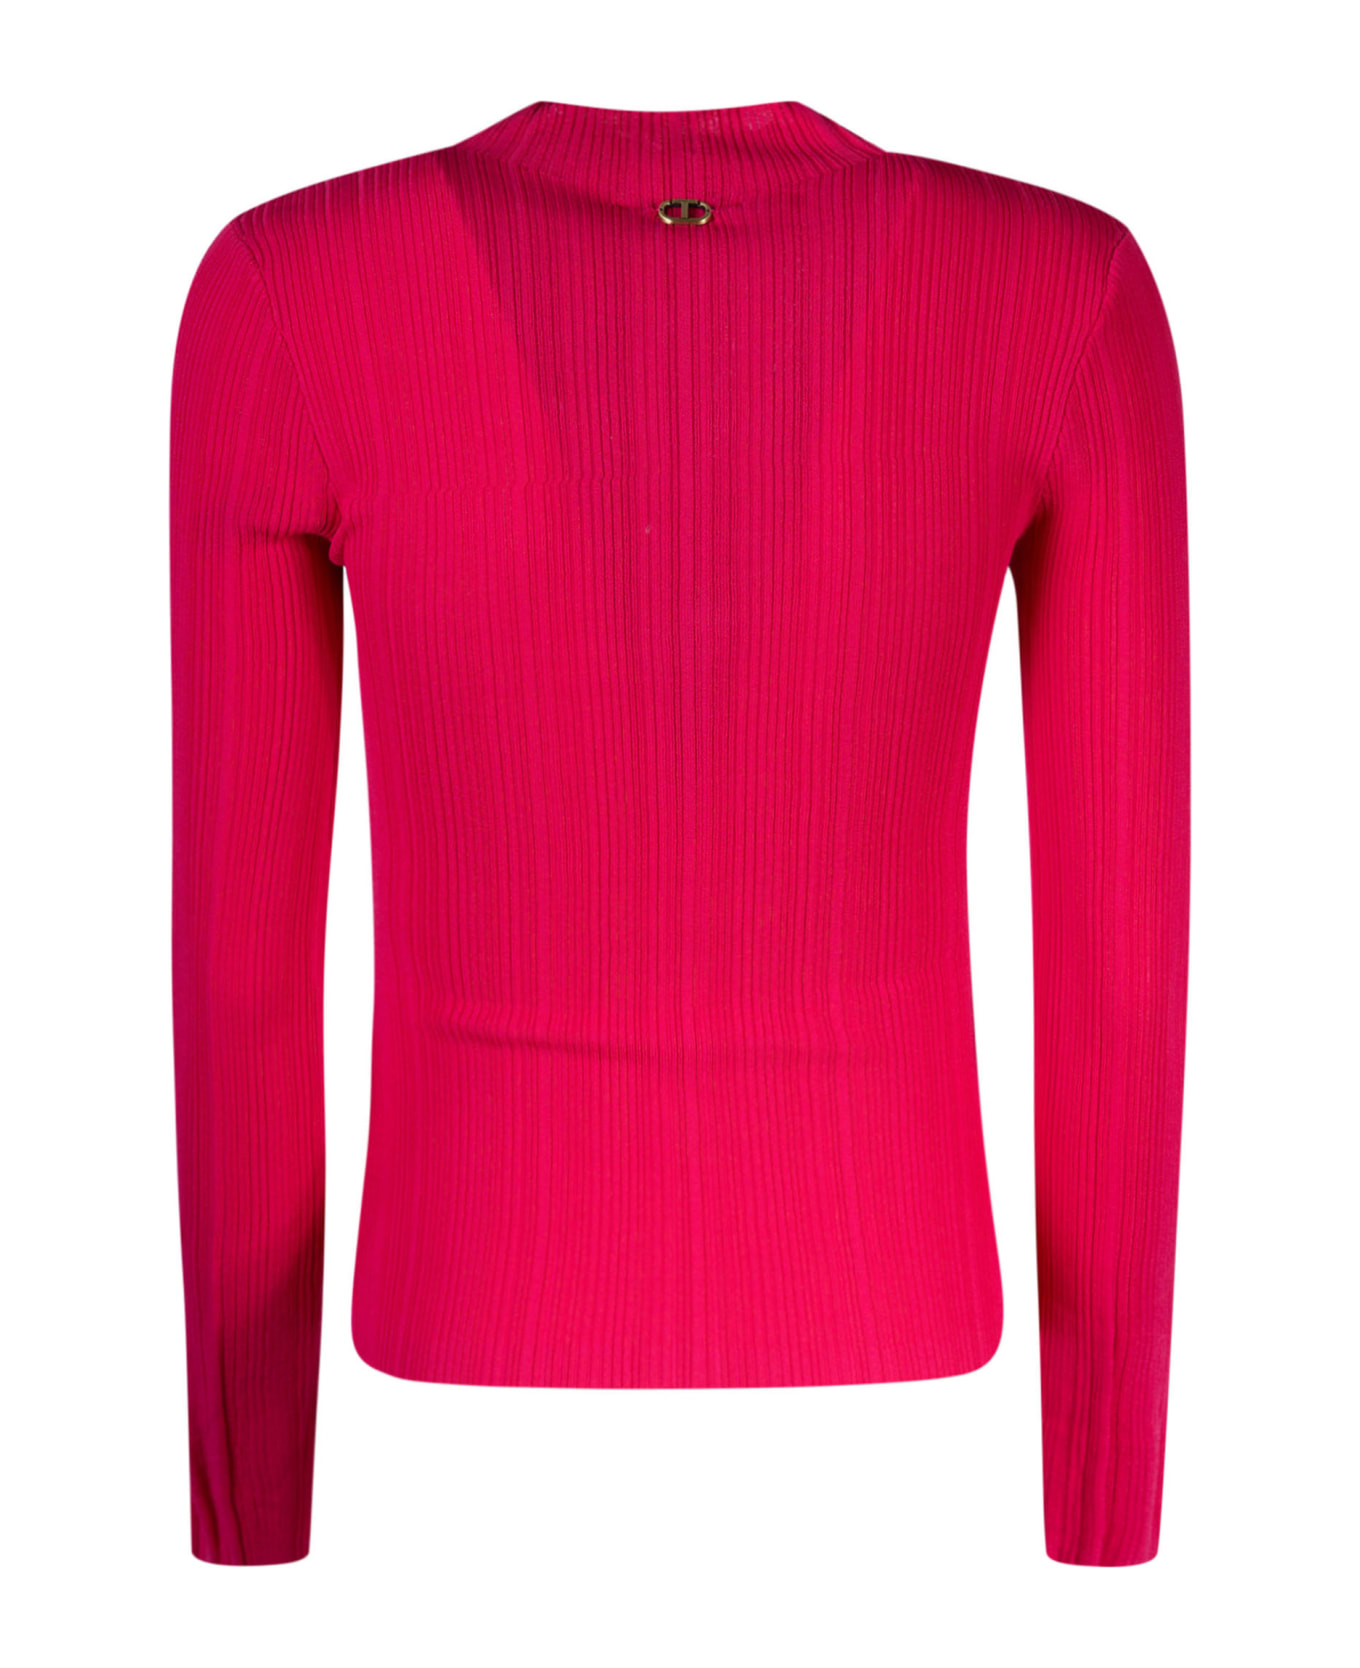 TwinSet Pleated Sweater - Bright Rose